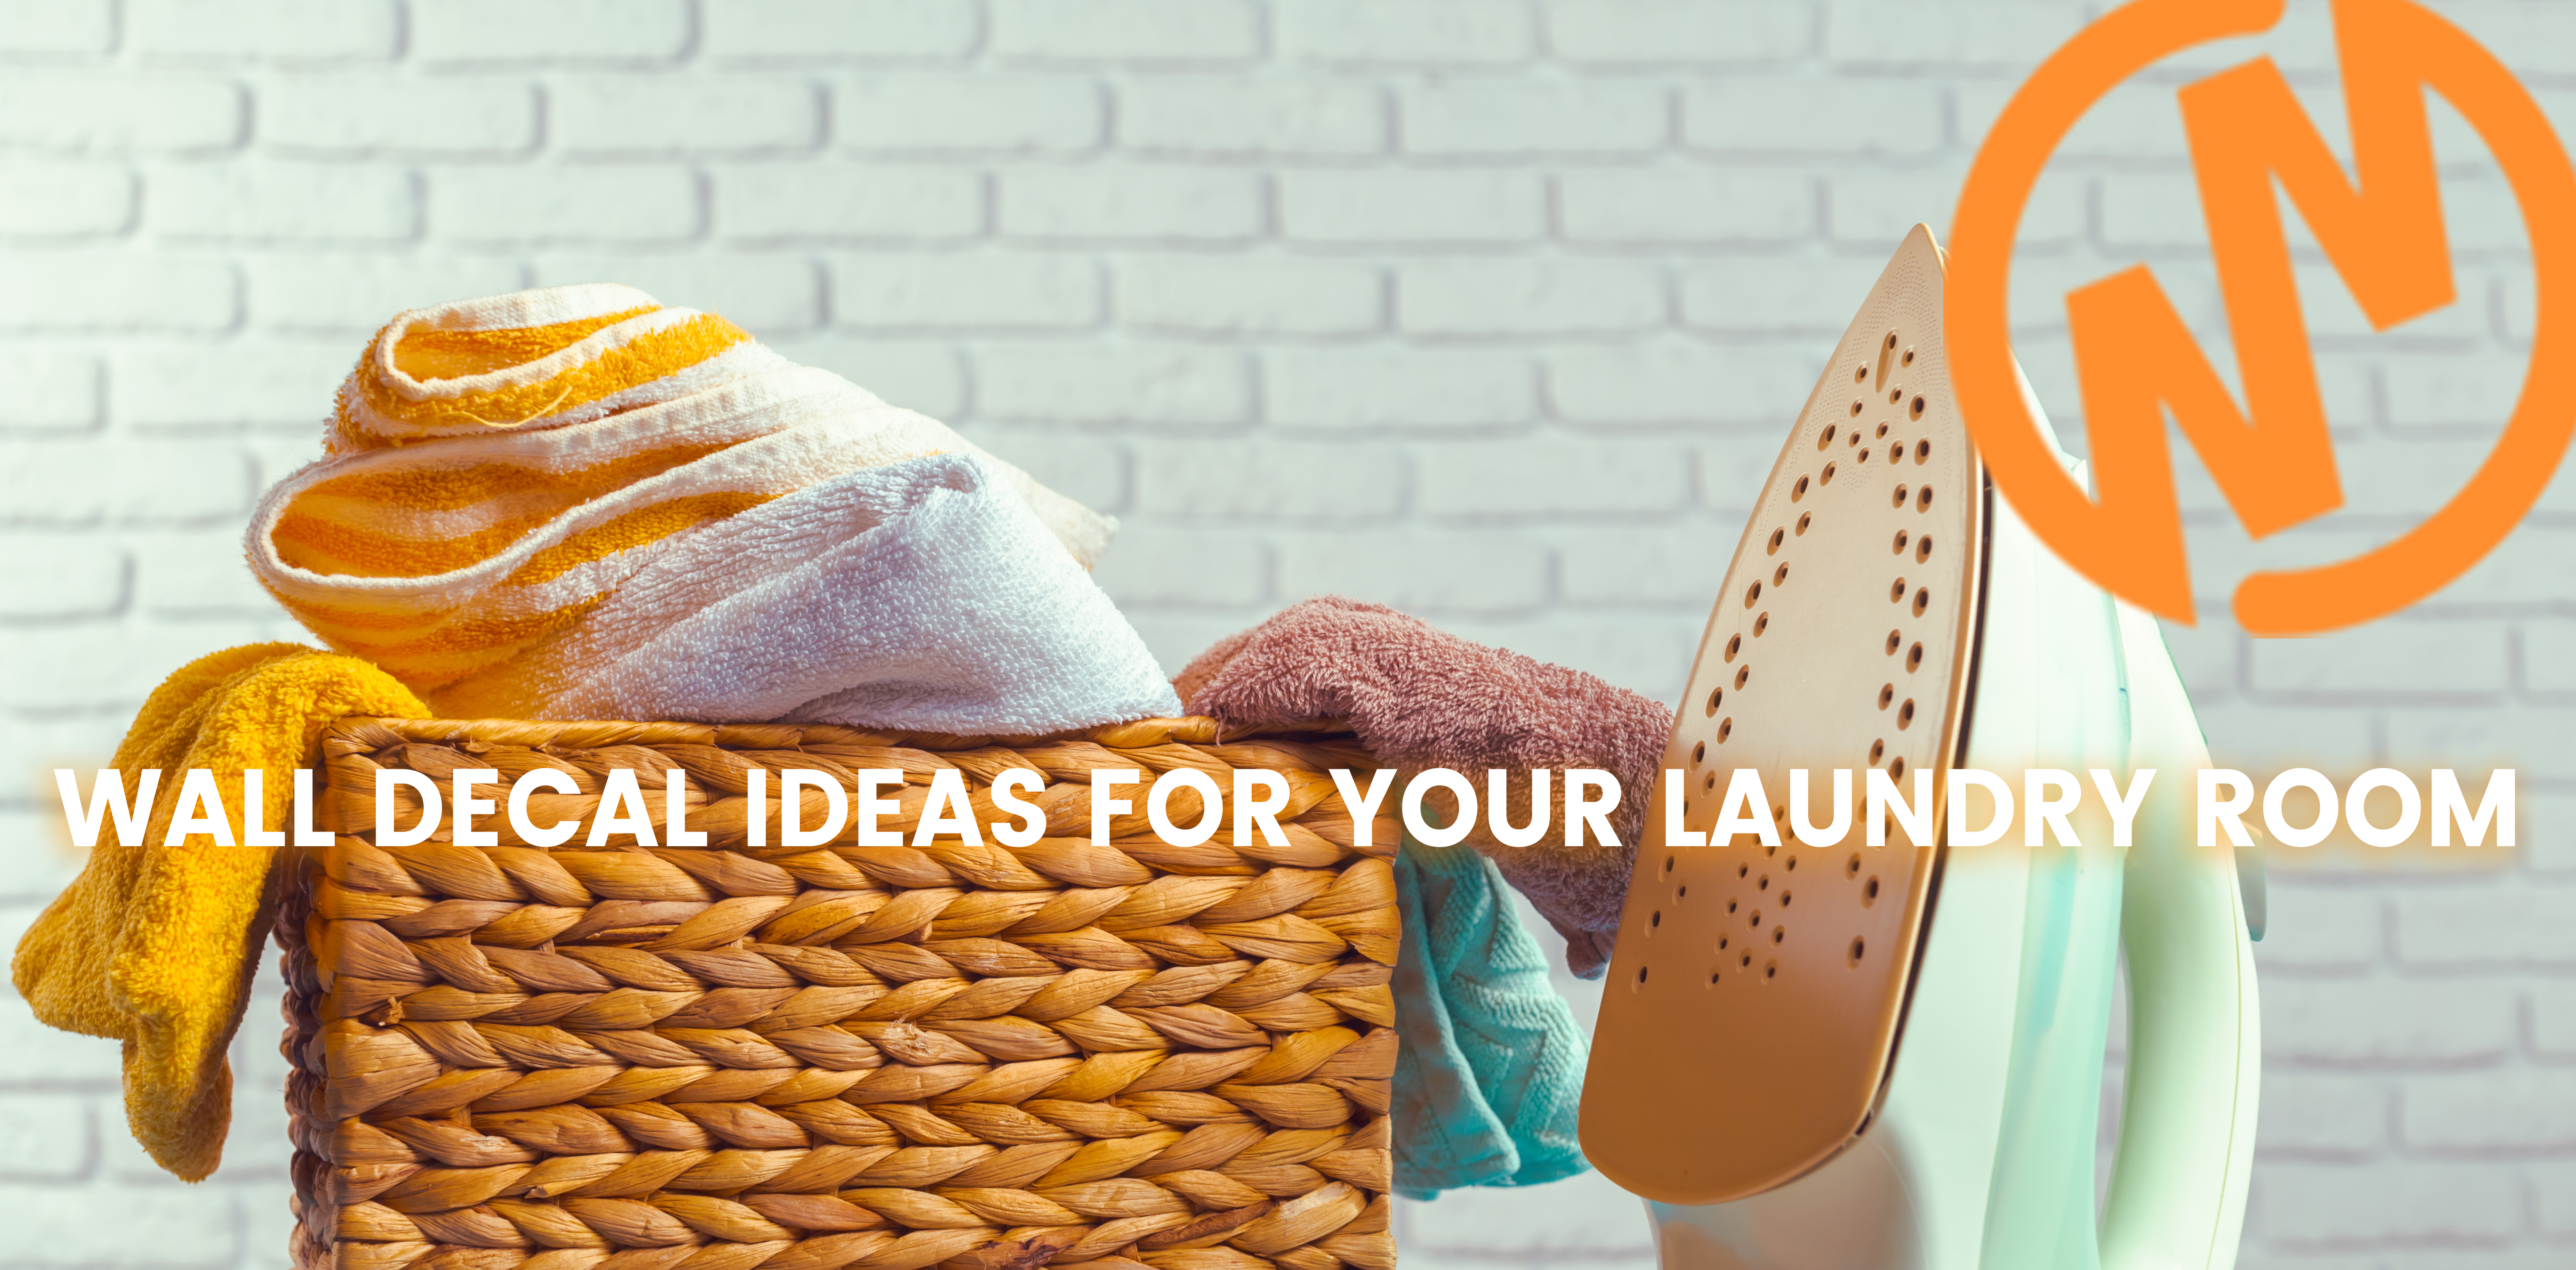 7 Of the Best Wall Decals for Your Laundry Room